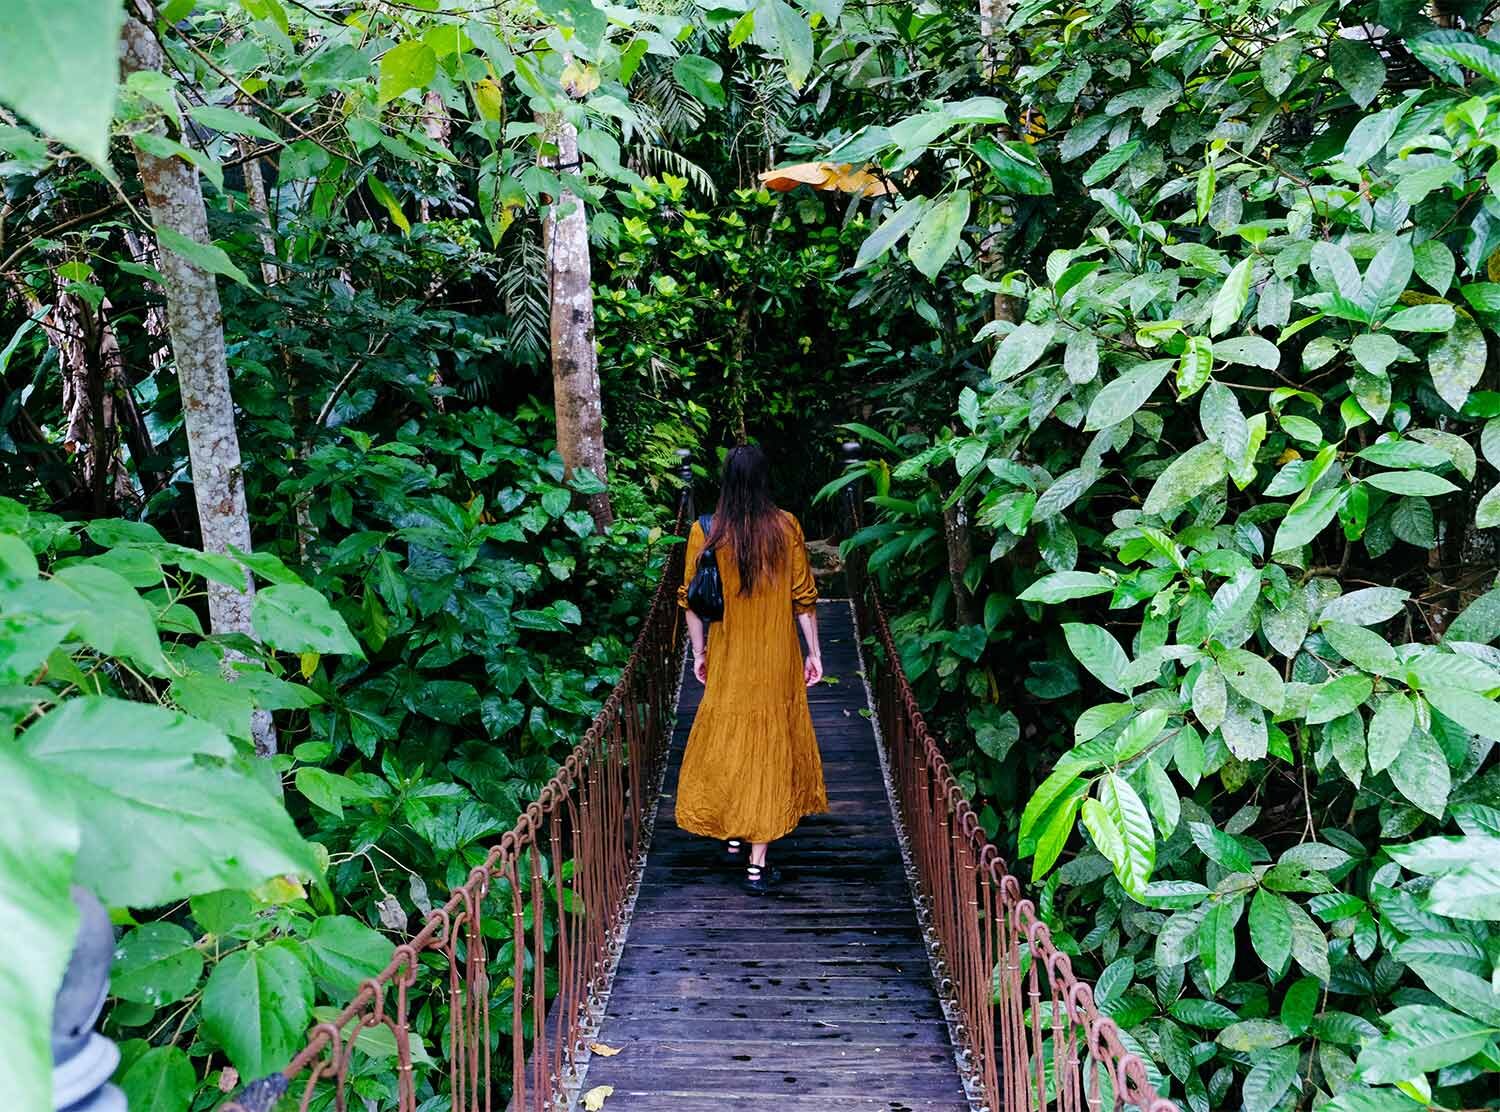 Capella Ubud When you work your way through the meticulously stared jungle, the entrance to each room, or rather tent, is a hanging bridge. What a magical way to discover your residence